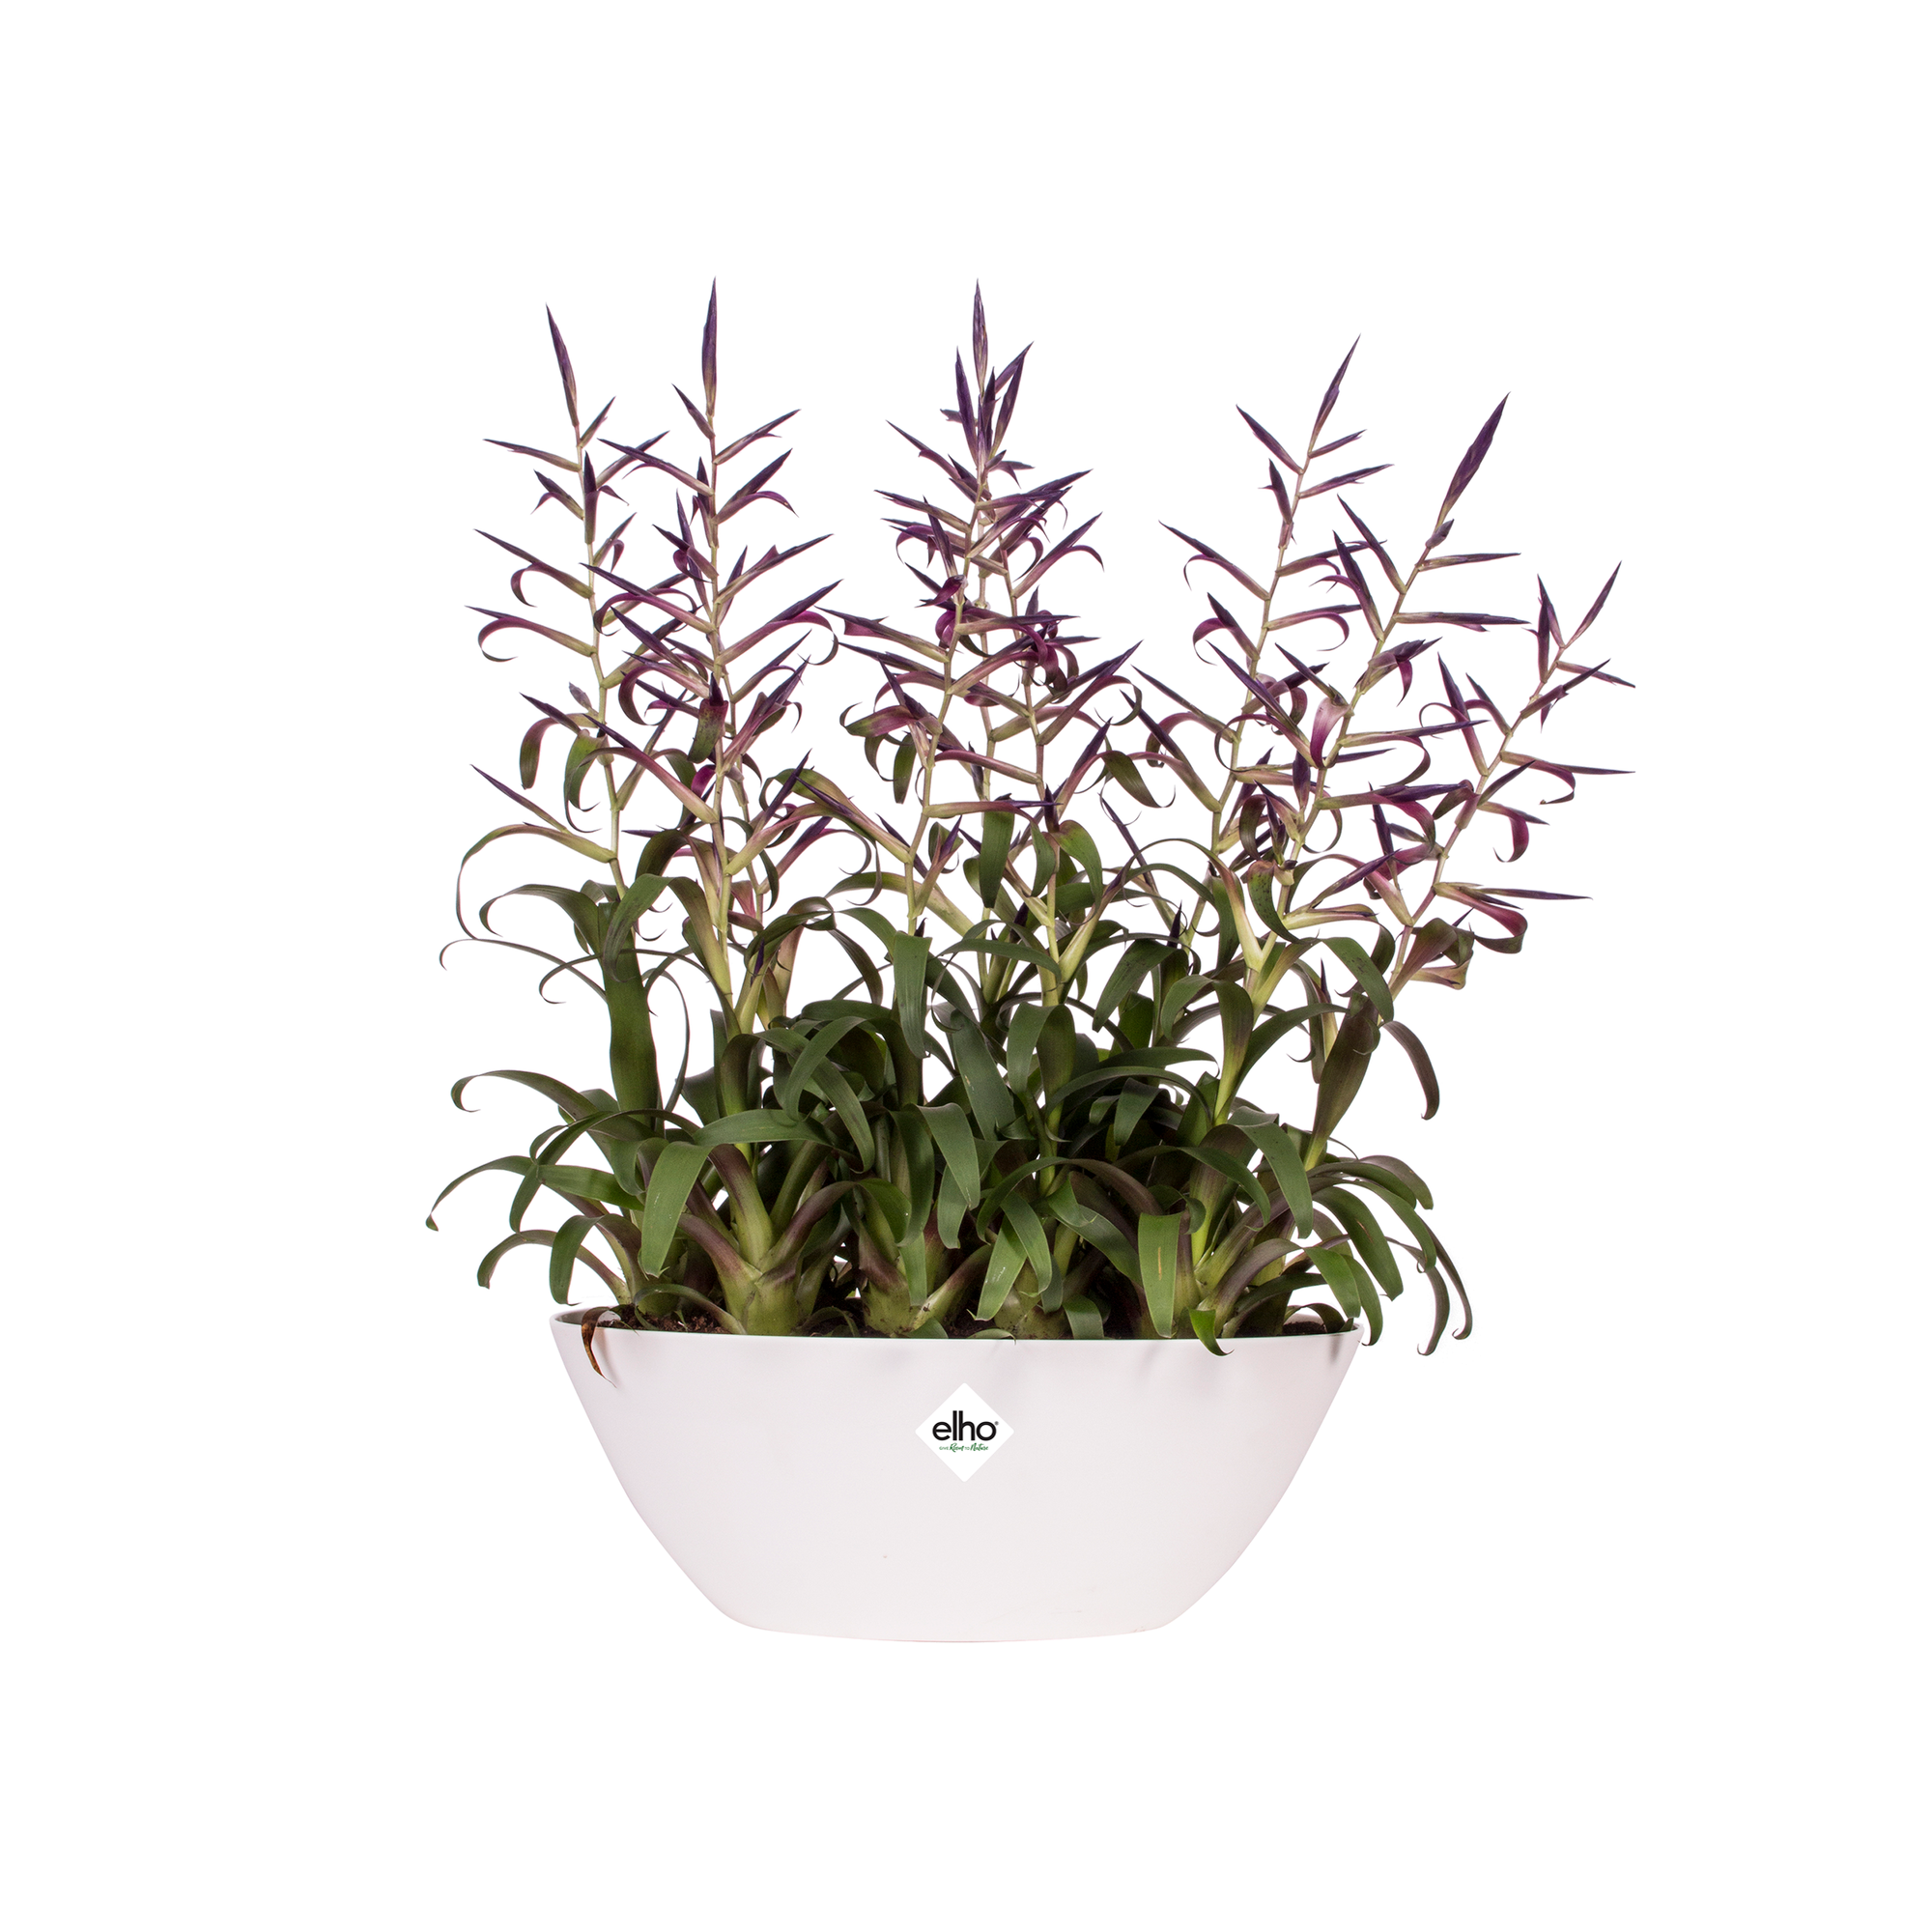 brussels oval 36cm weiss - elho® - Give room to nature